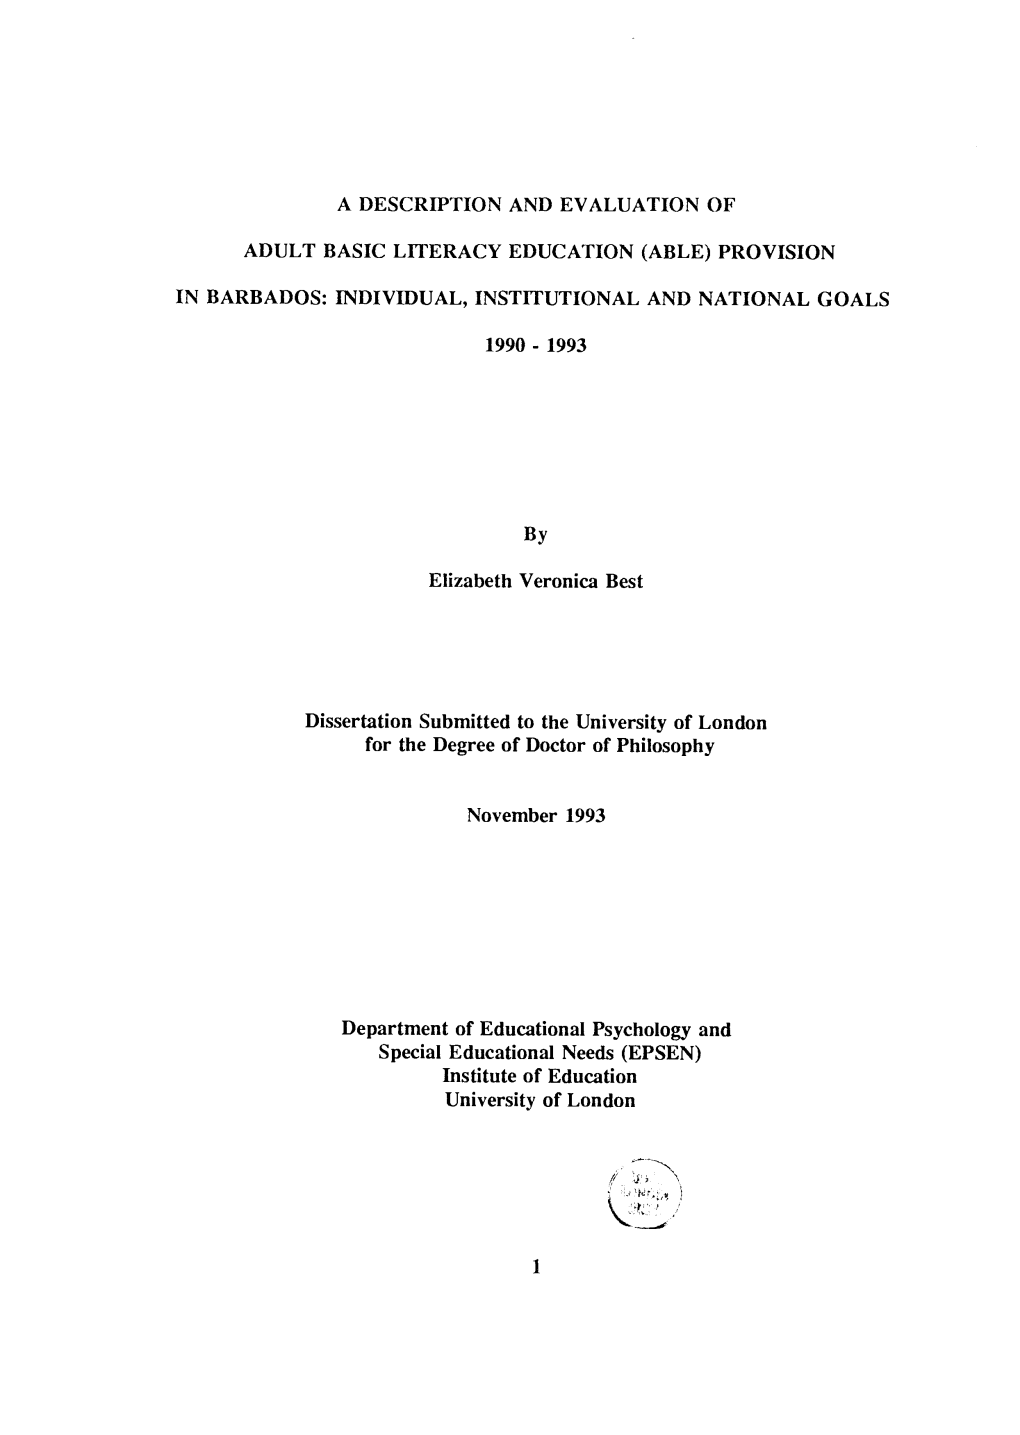 A Description and Evaluation of Adult Basic Literacy Education (ABLE)